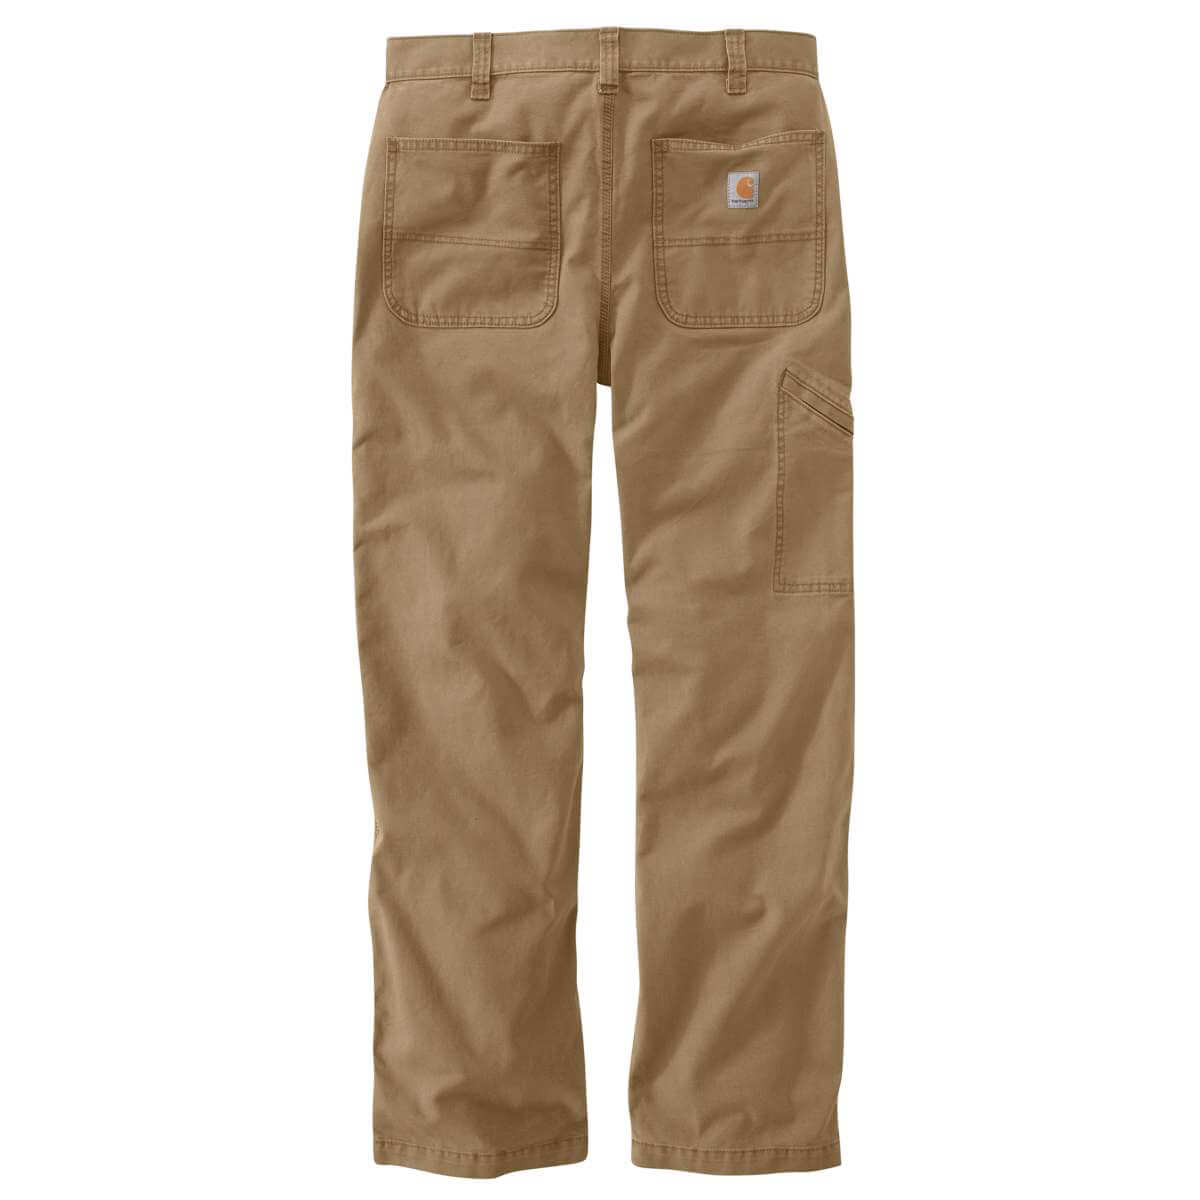 PANTS-102291 M Rugged Flex® Relaxed Fit Canvas Work Pant (in Dark Khaki)